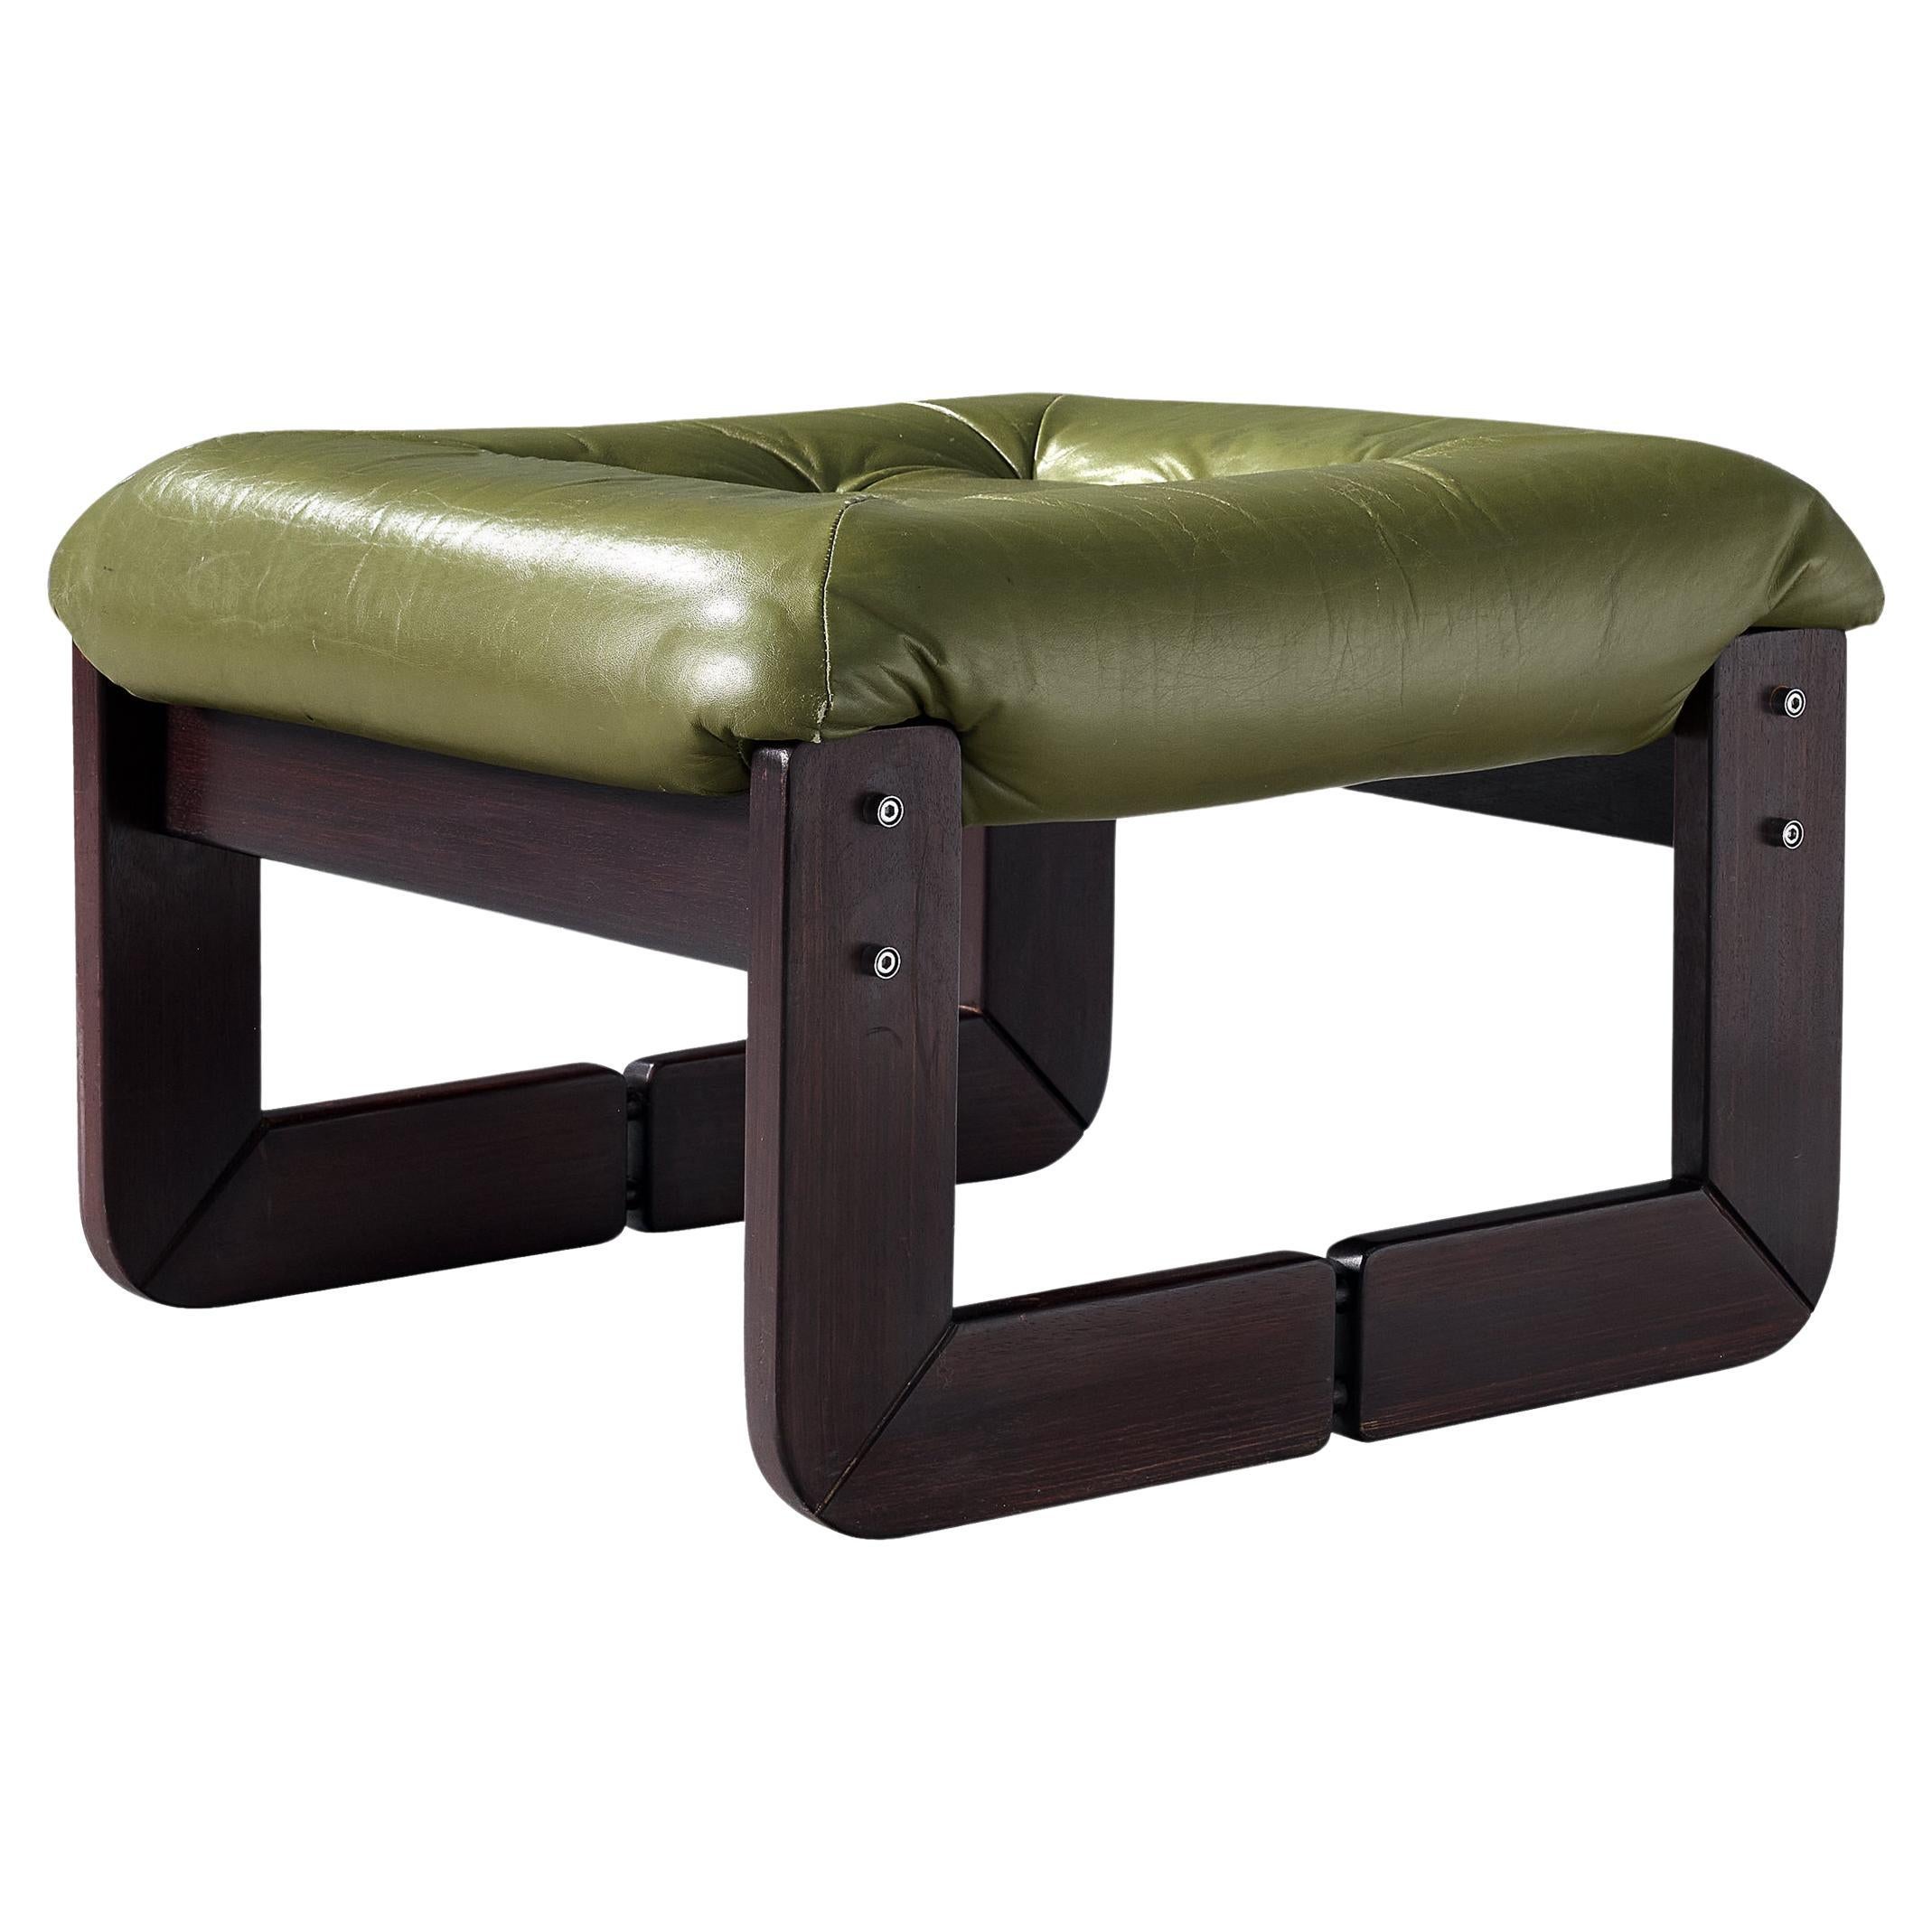 Percival Lafer Ottoman in Olive Green Leather and Mahogany  For Sale